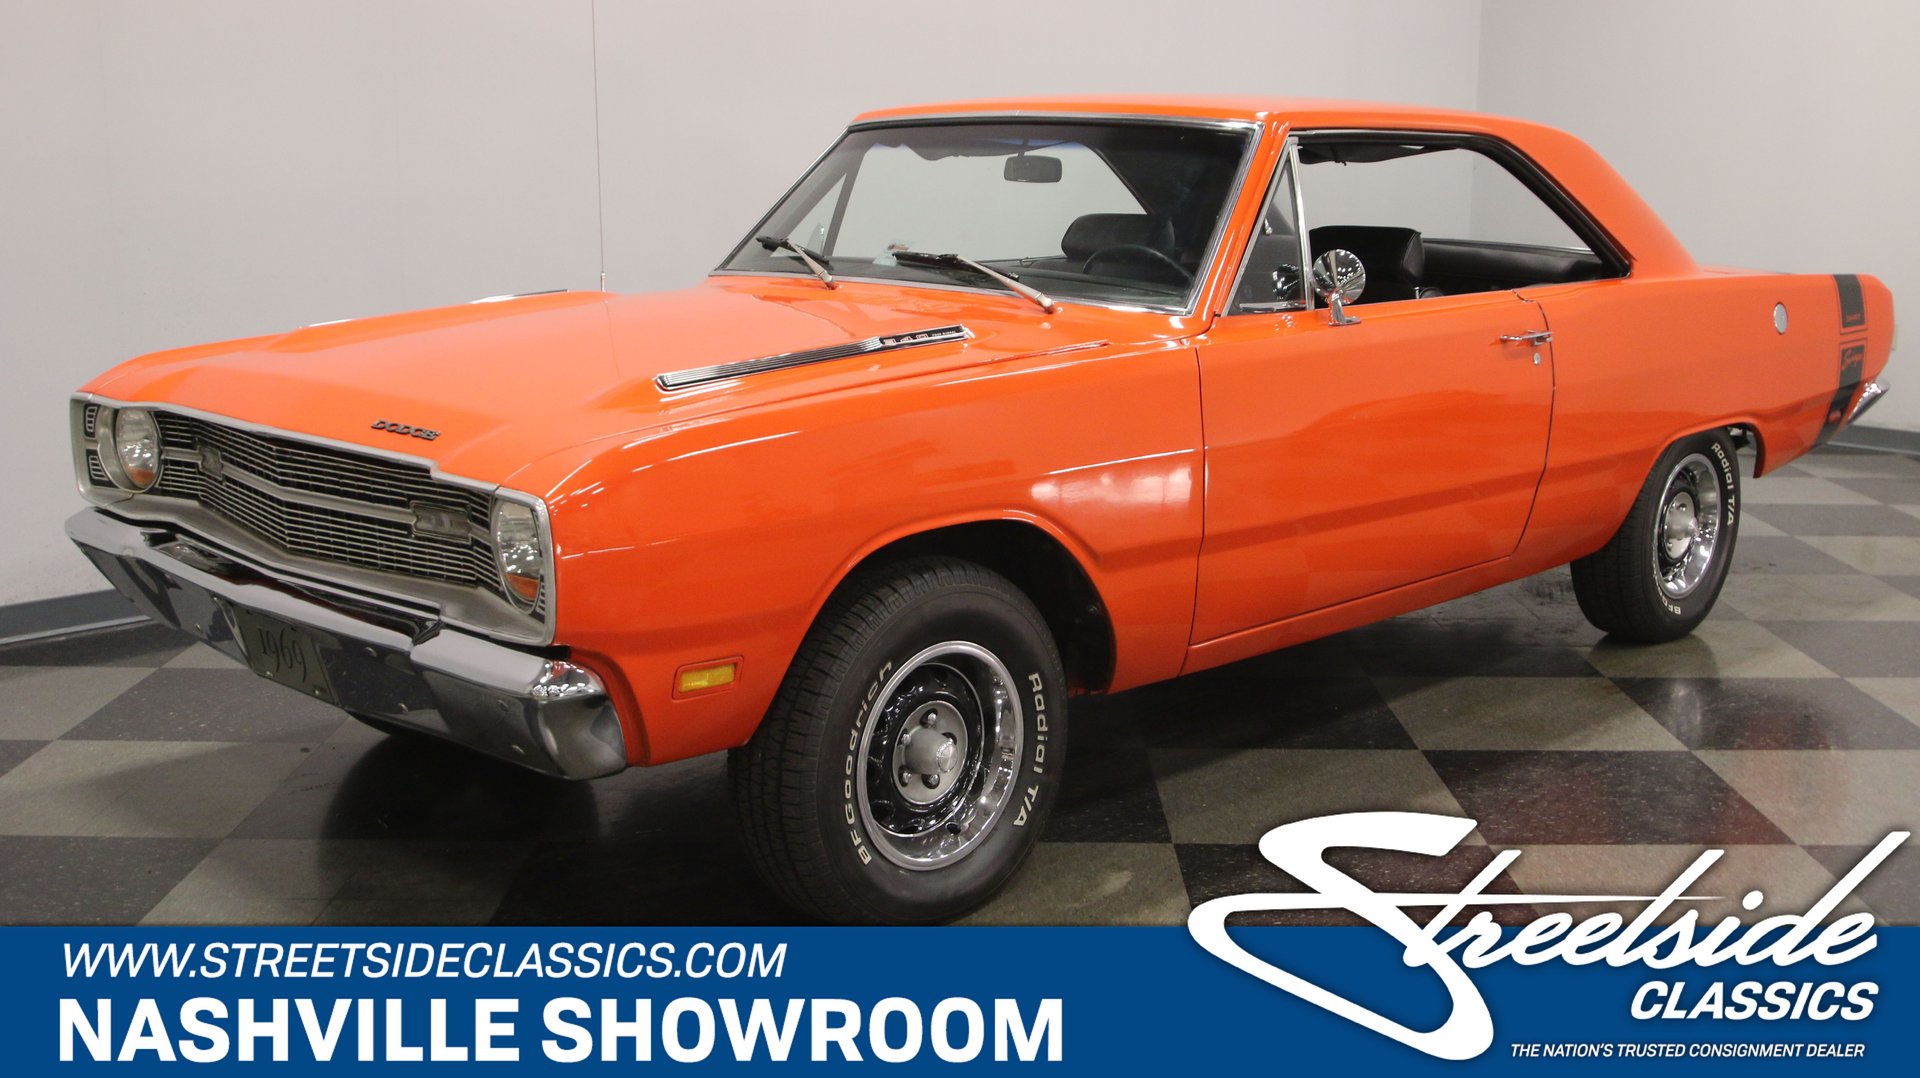 1969 Dodge Dart Classic Cars for Sale